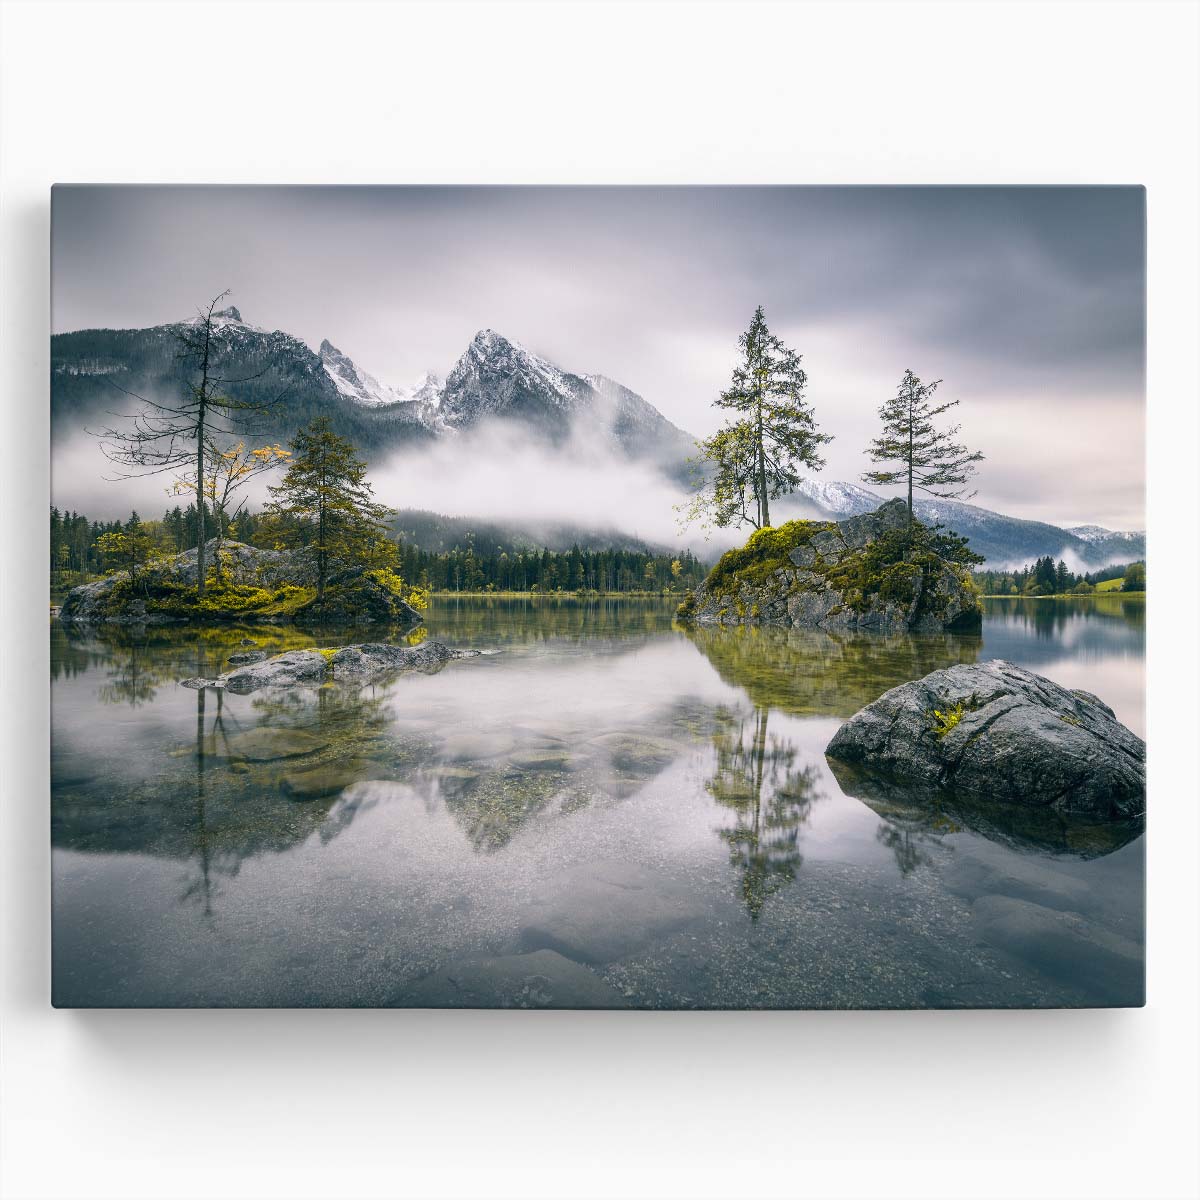 Hintersee Lake Bavarian Alps Misty Morning Photography Wall Art by Luxuriance Designs. Made in USA.